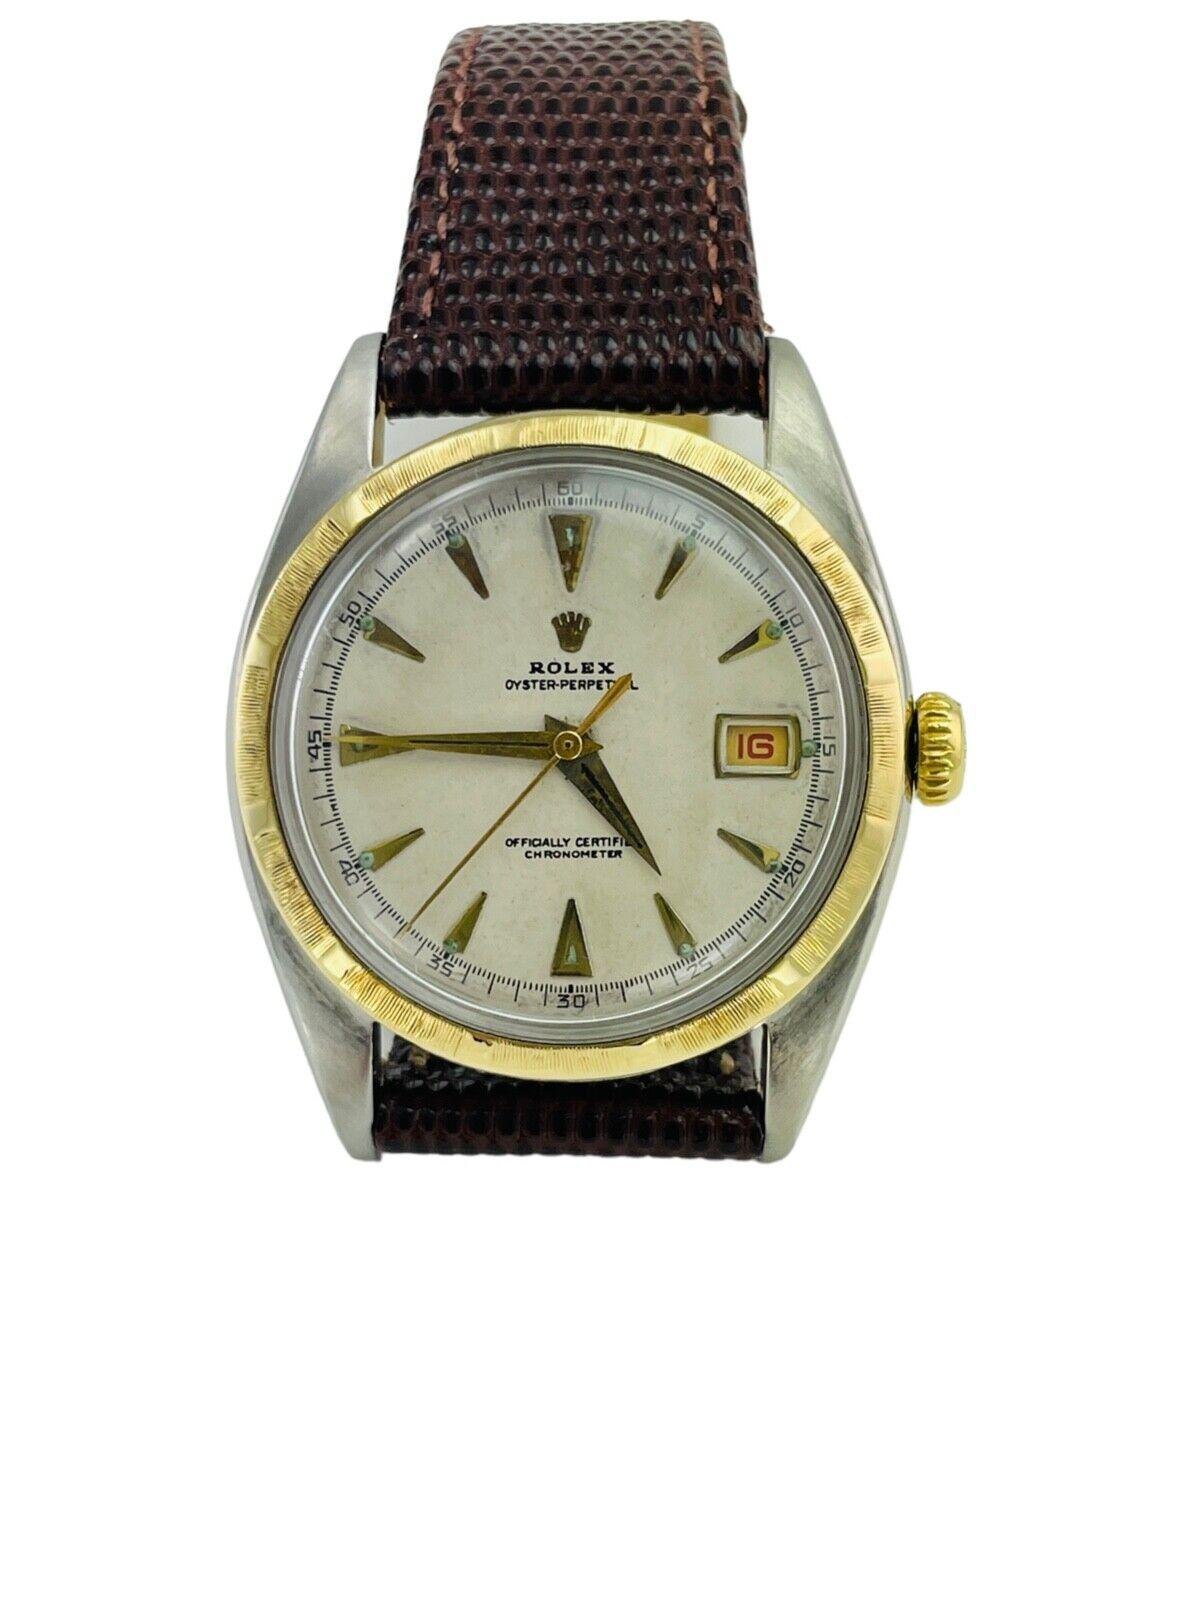 1953 Rolex Bubbleback 14K bezel Gold Stainless Steel Watch Ref. 6105

Vintage Rolex Bubbleback with a 14k yellow gold bezel and stainless steel case, ref: 6105  The watch case is attached to a leather band with an authentic Rolex buckle. This is a